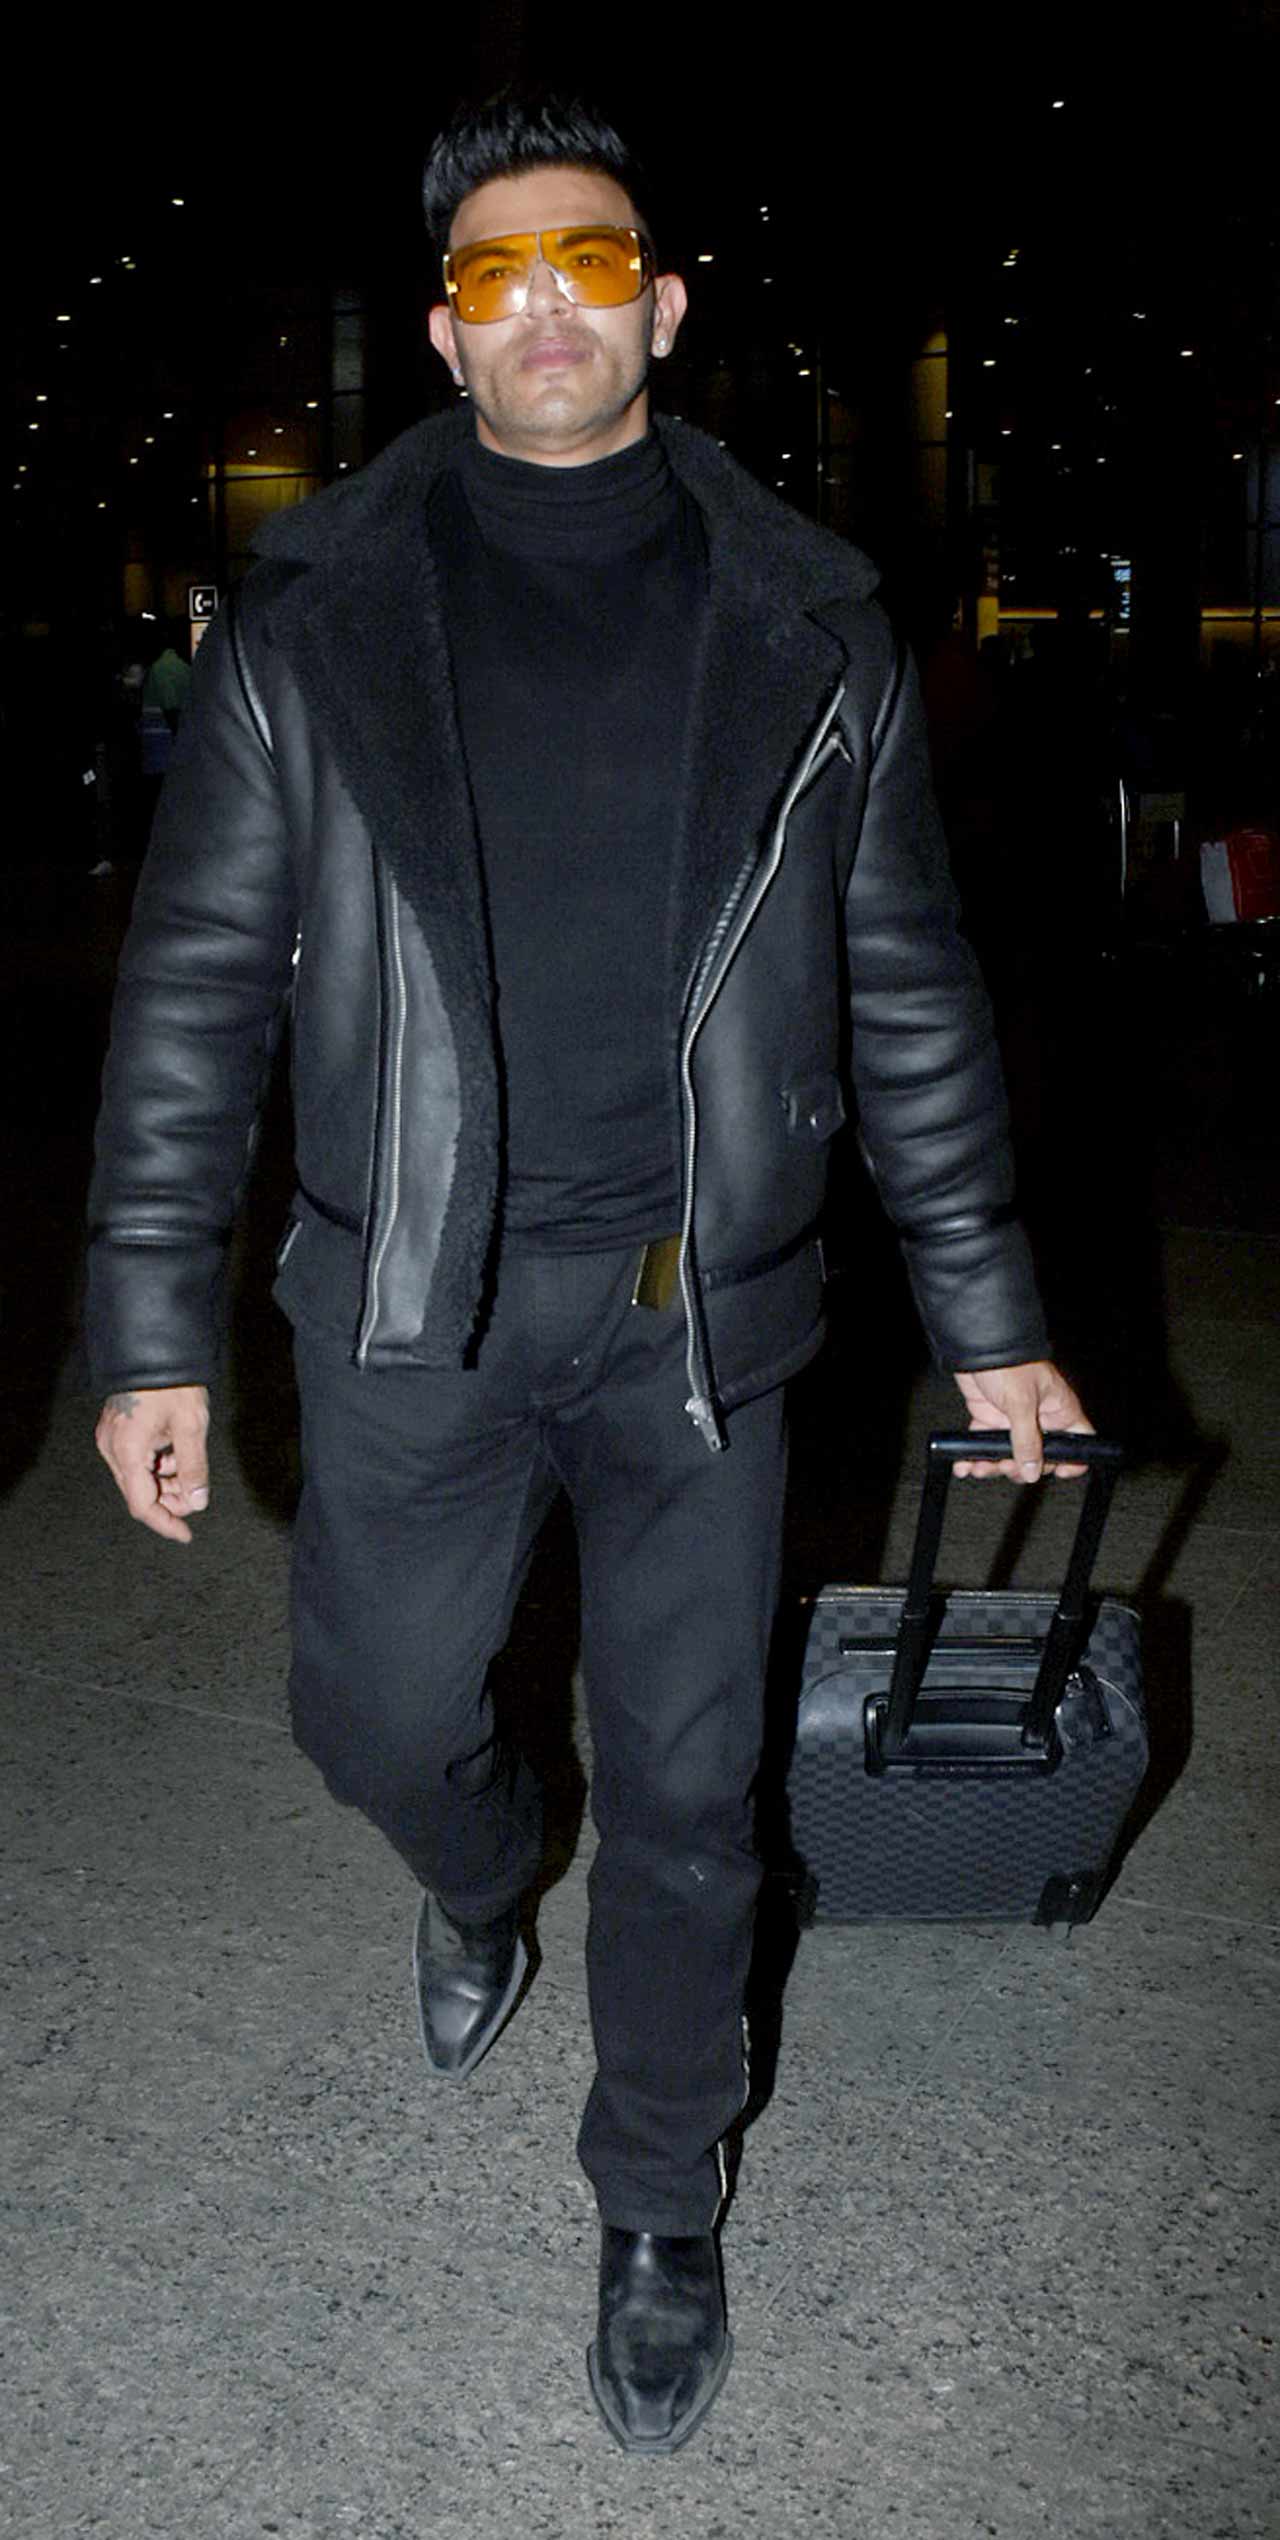 Sahil Khan looked dapper in his all-black outfit when snapped by the paparazzi at the Mumbai airport.